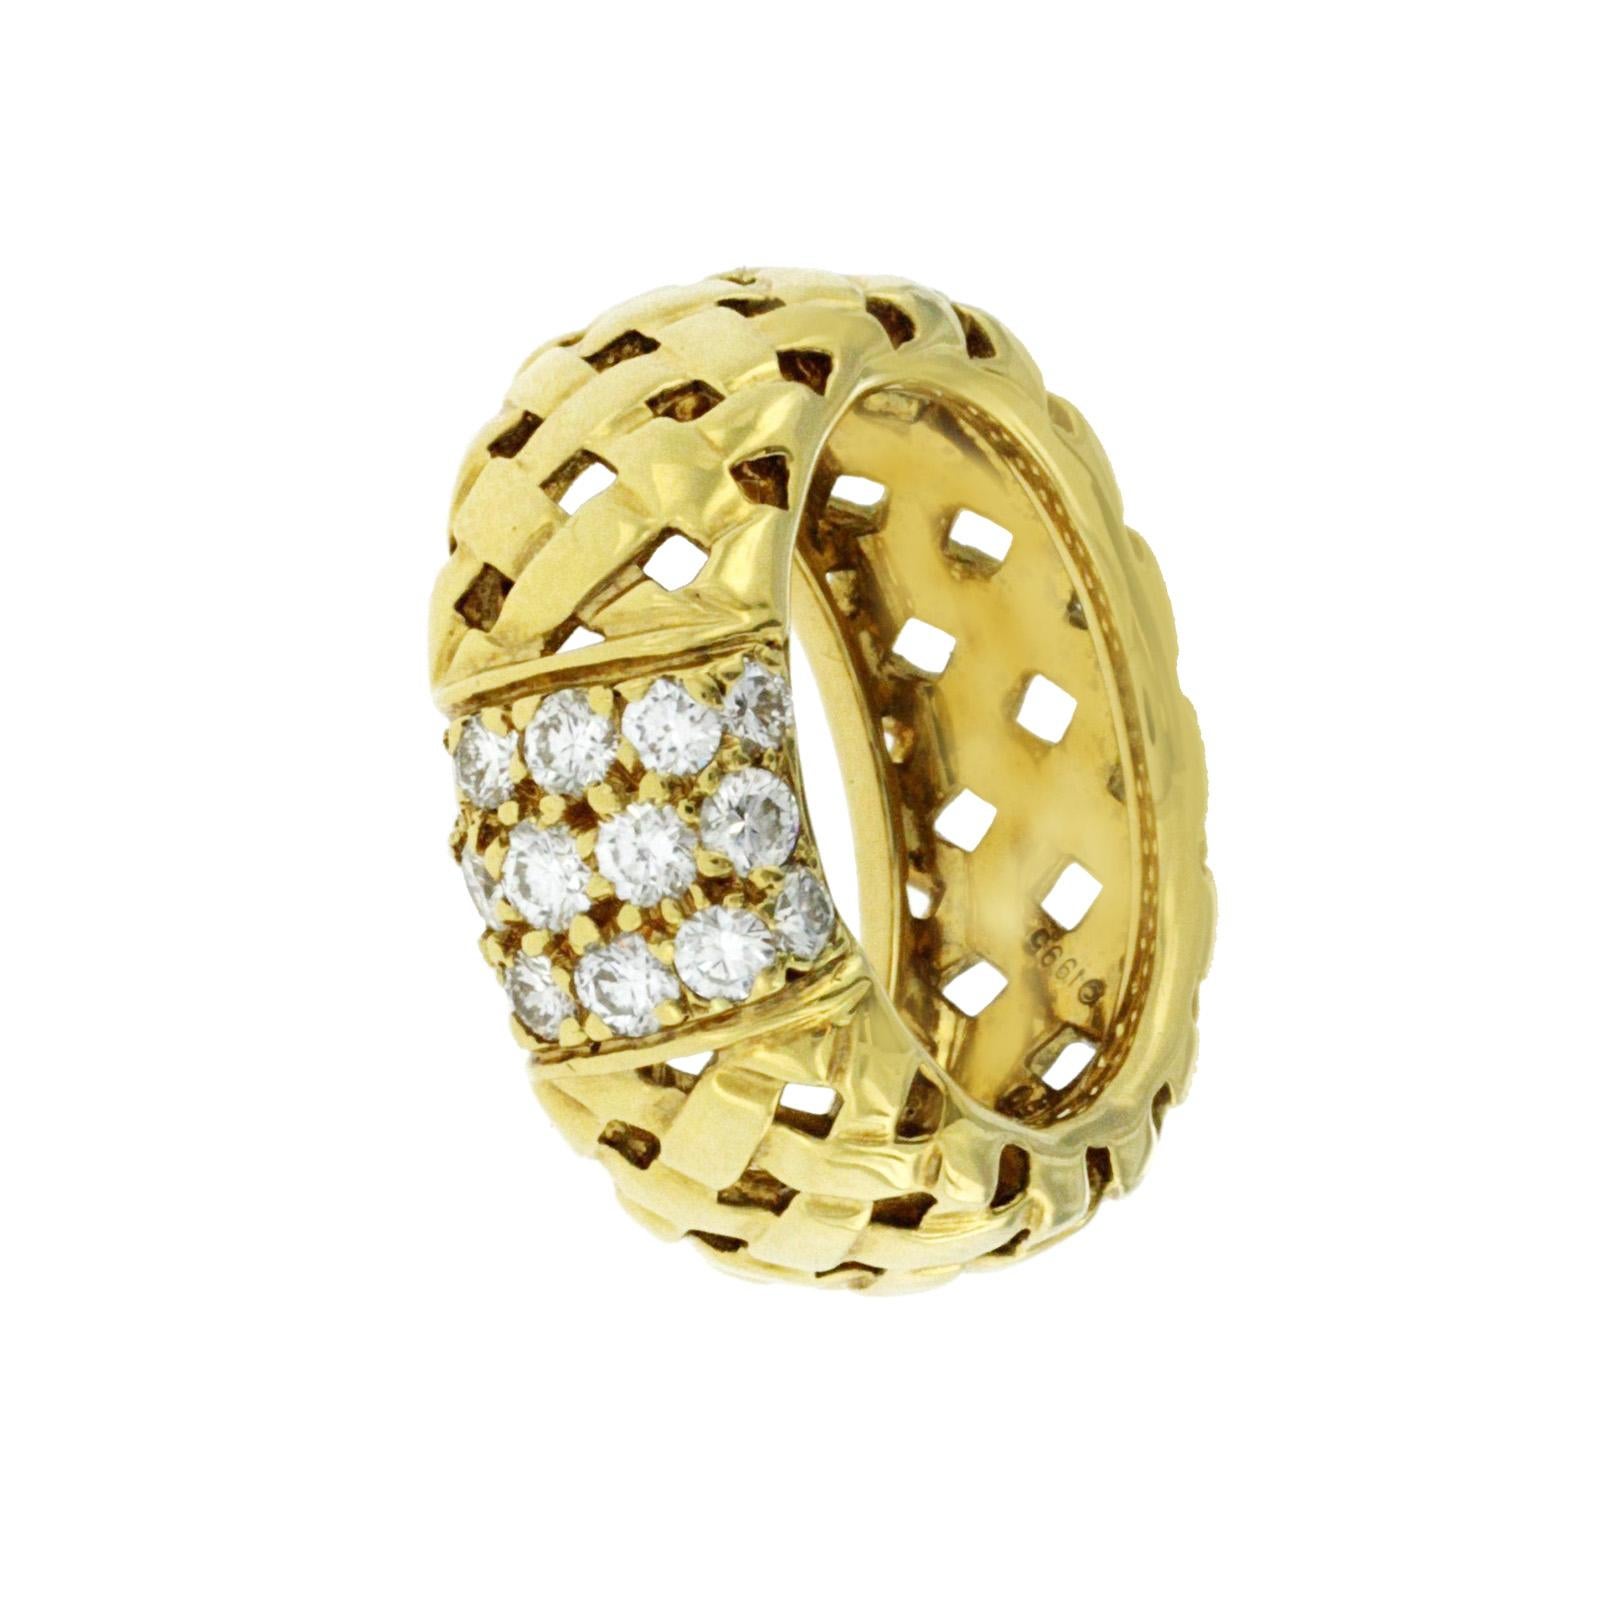 100% Authentic, 100% Customer Satisfaction

Band Width: 8.5 mm

Metal: 18K Yellow Gold

Size: 5

Hallmarks: T& Co 750

Total Weight: 8.2  Grams

Stone Type: 0.70 CT Diamonds F VVS

Condition: Pre Owned 

Estimated Retail Price: $5200

Stock Number: